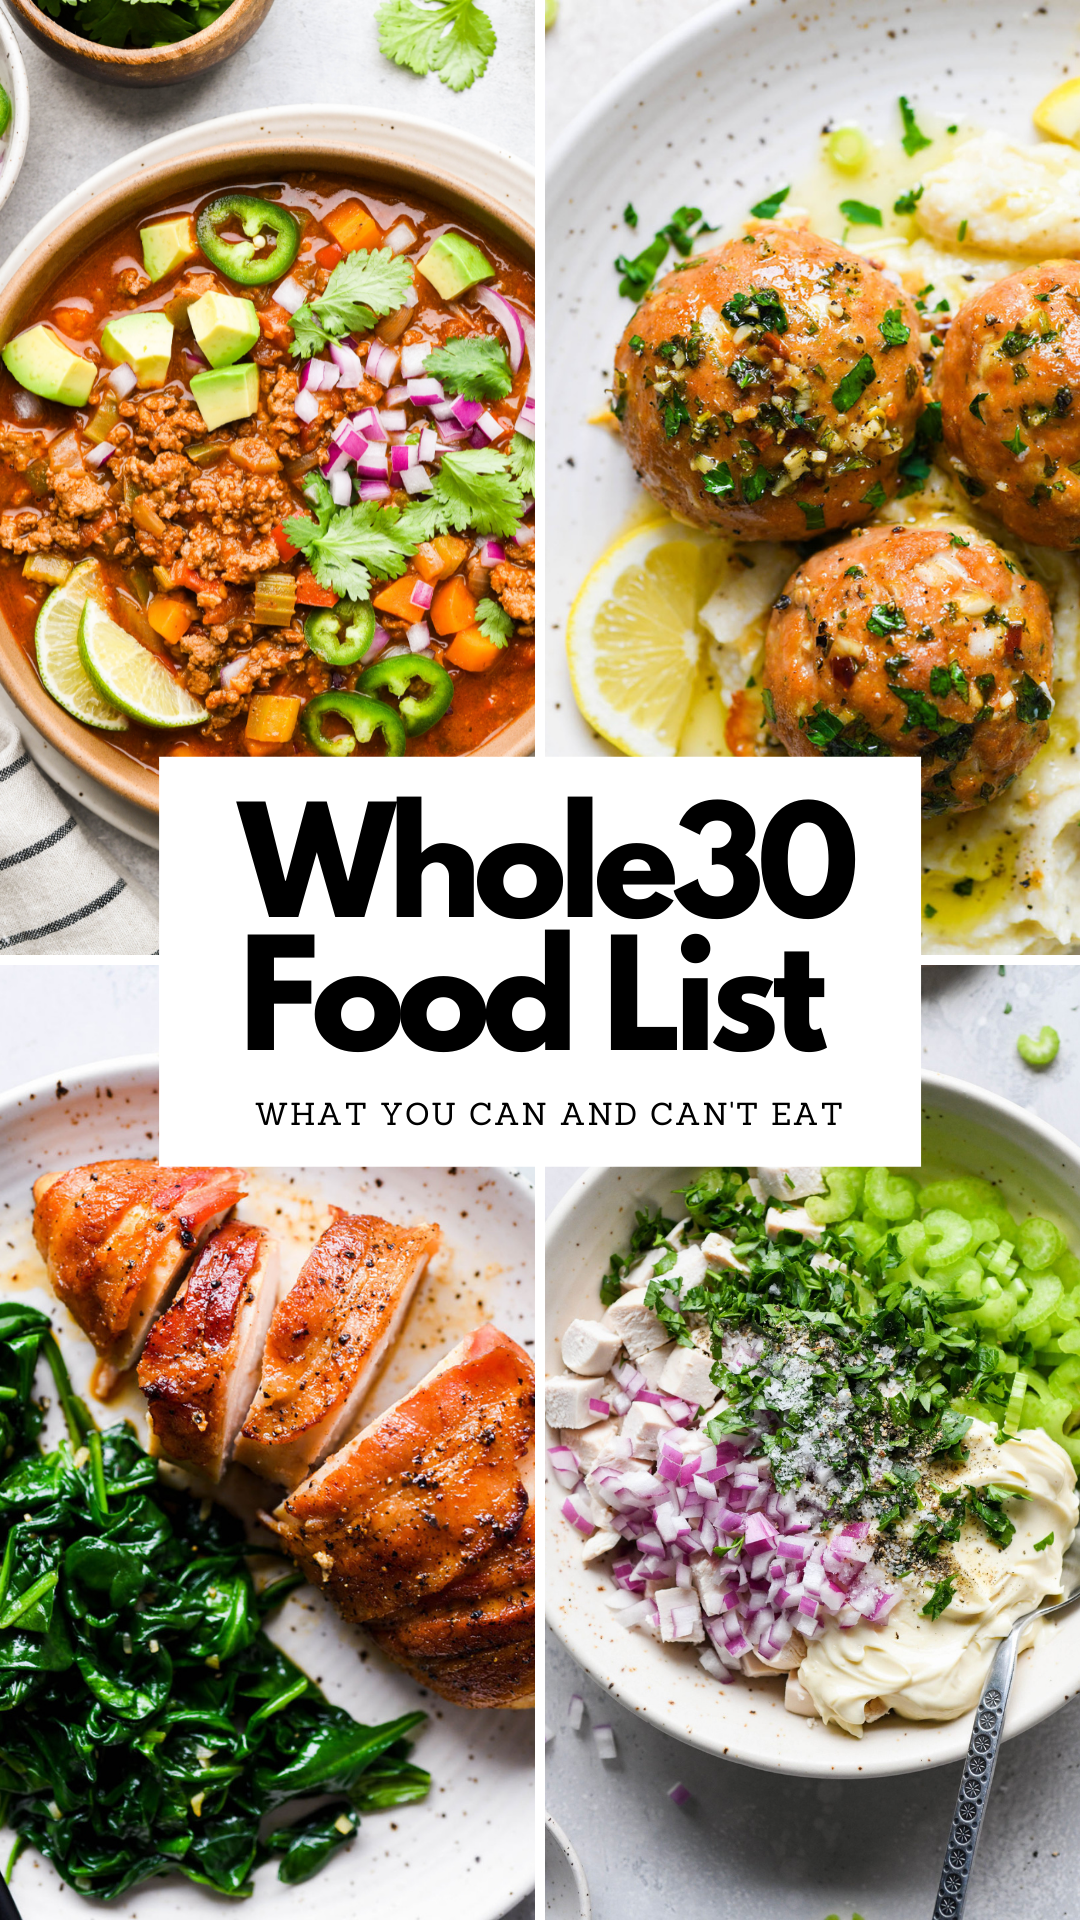 Take the guesswork out of planning for your Whole30 by downloading this Whole30 approved food list & Whole30 guide to additives & hidden ingredients. These printable lists include everything you need to know to plan your meals and successfully navigate reading labels so you know exactly what you can and can't eat during your Whole30!